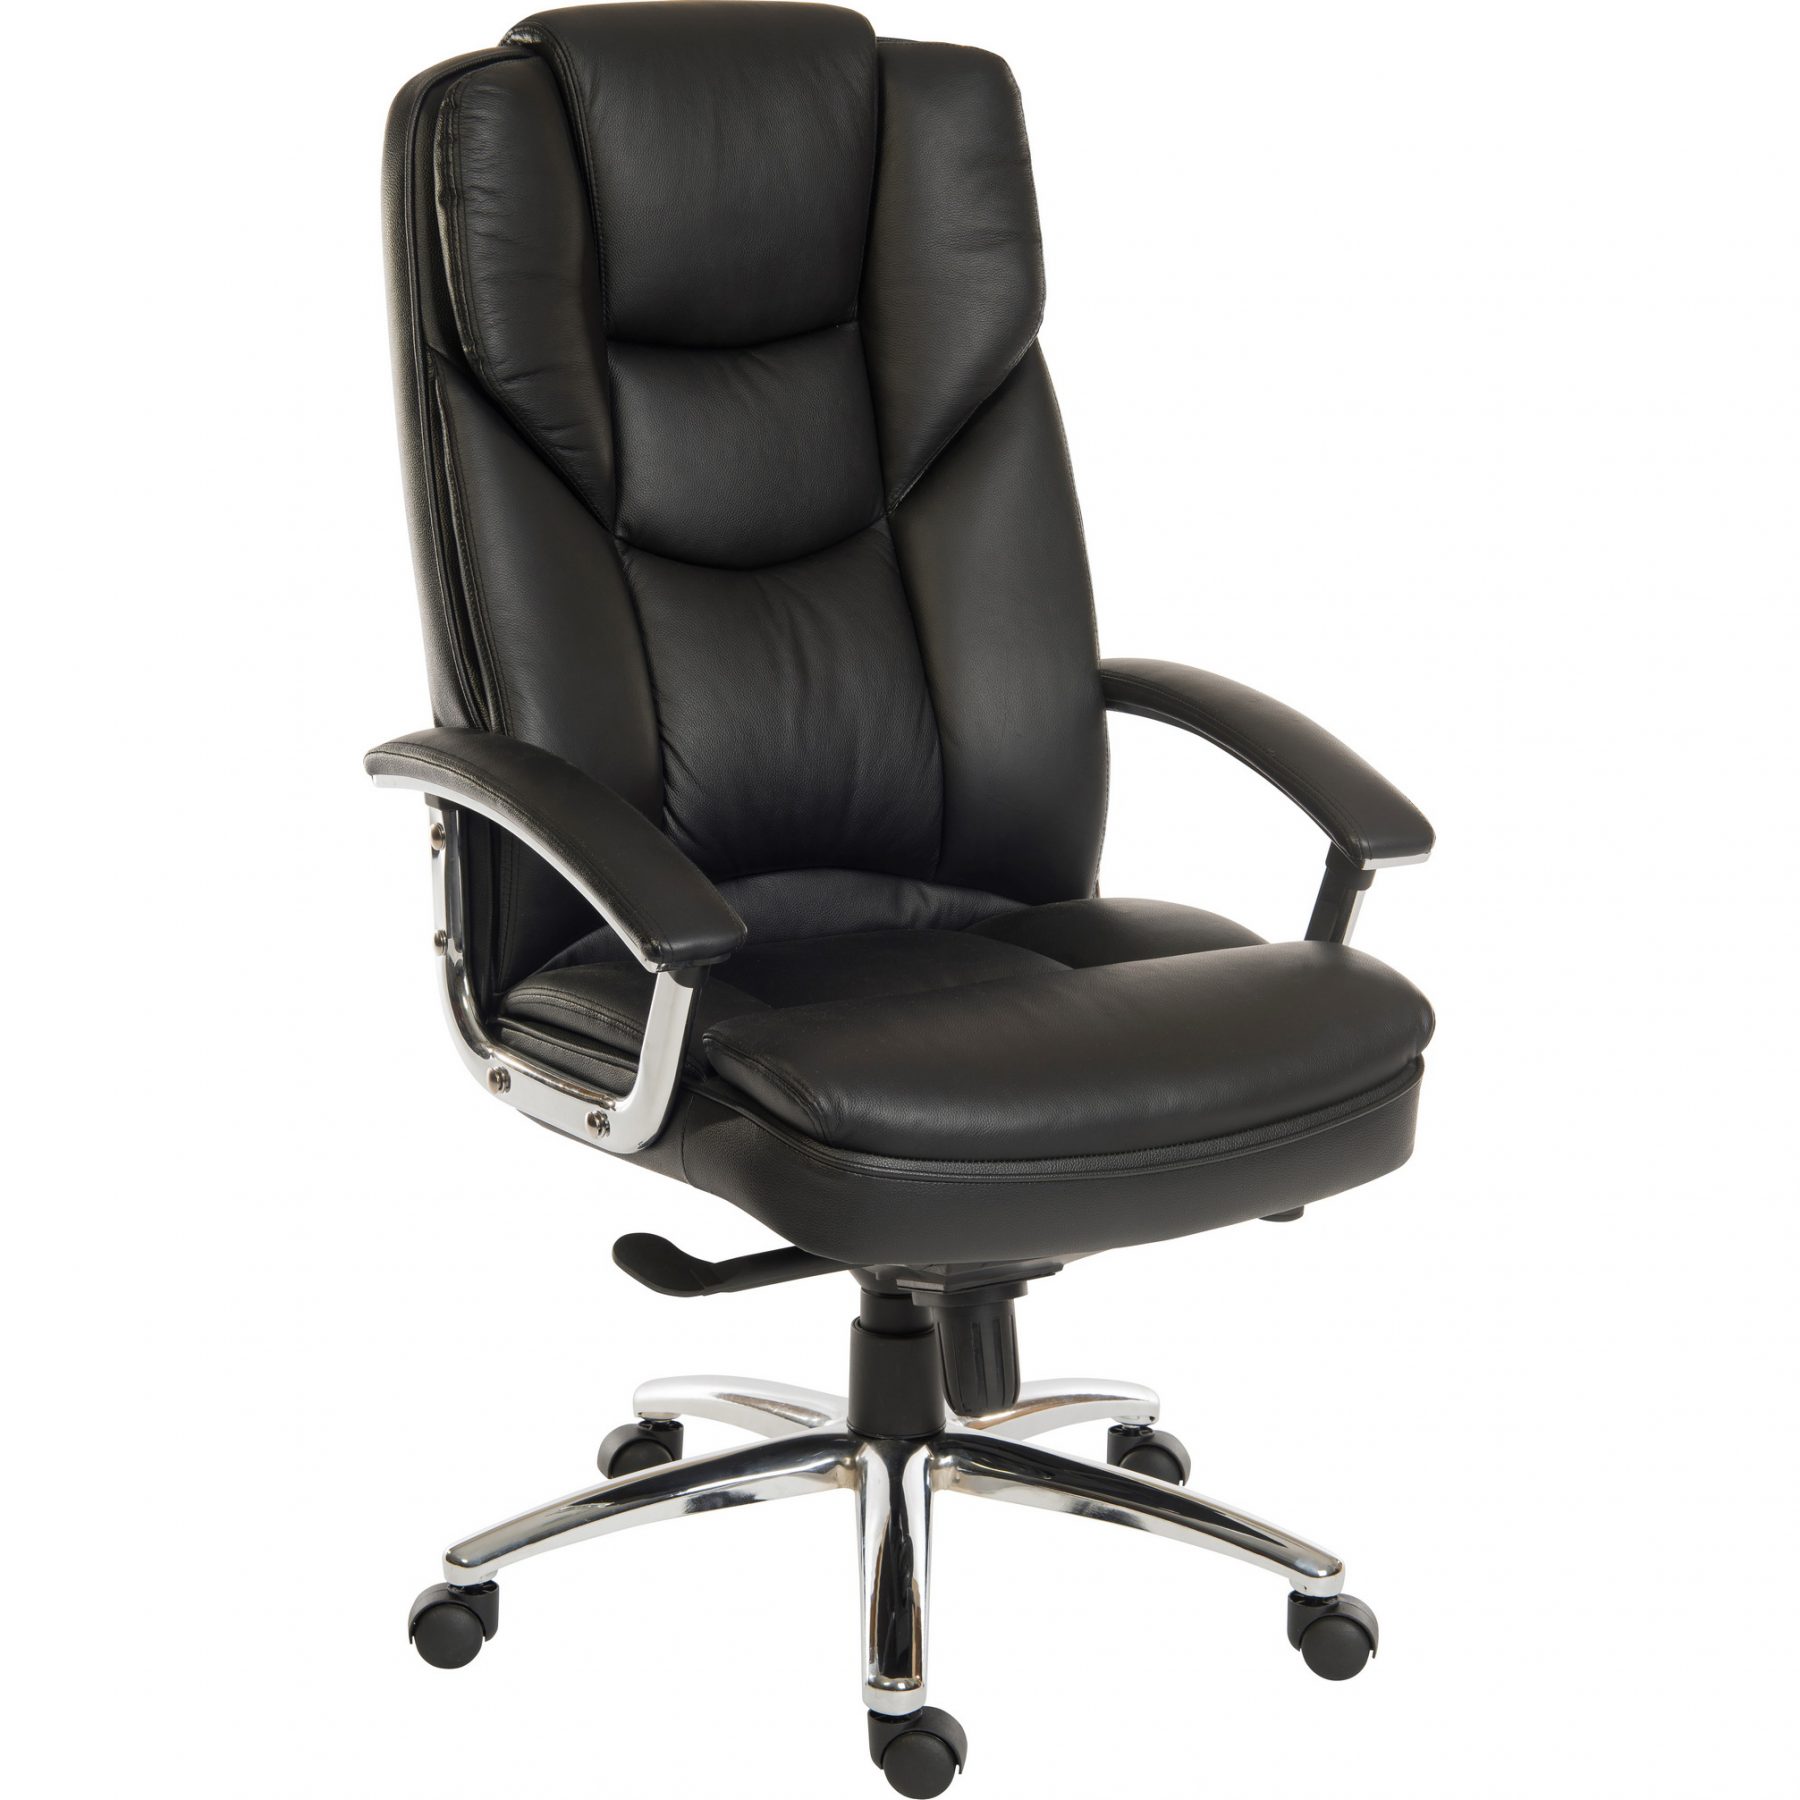 Bromley Luxury Italian Leather Black Office Chair | Home ...